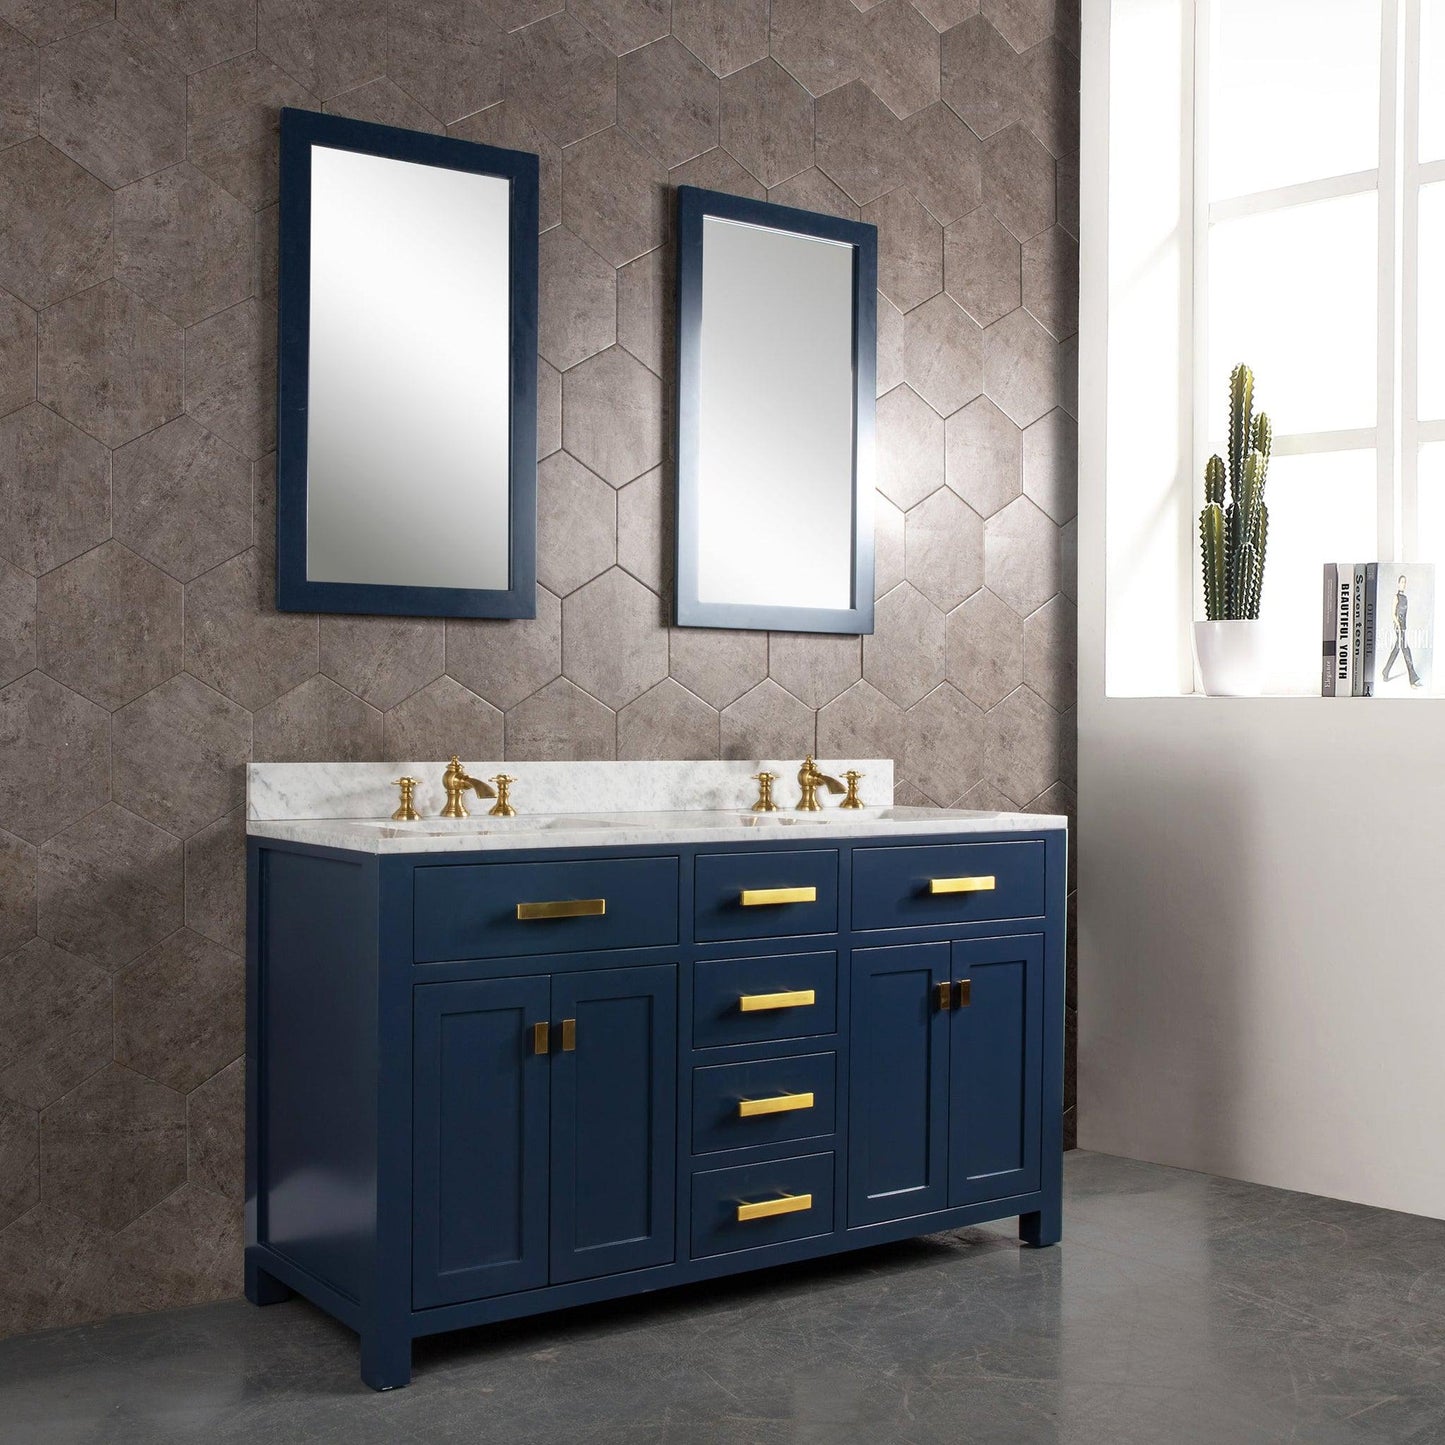 Water Creation Madison 60" Double Sink Carrara White Marble Vanity In Monarch BlueWith F2-0013-06-FX Lavatory Faucet(s)